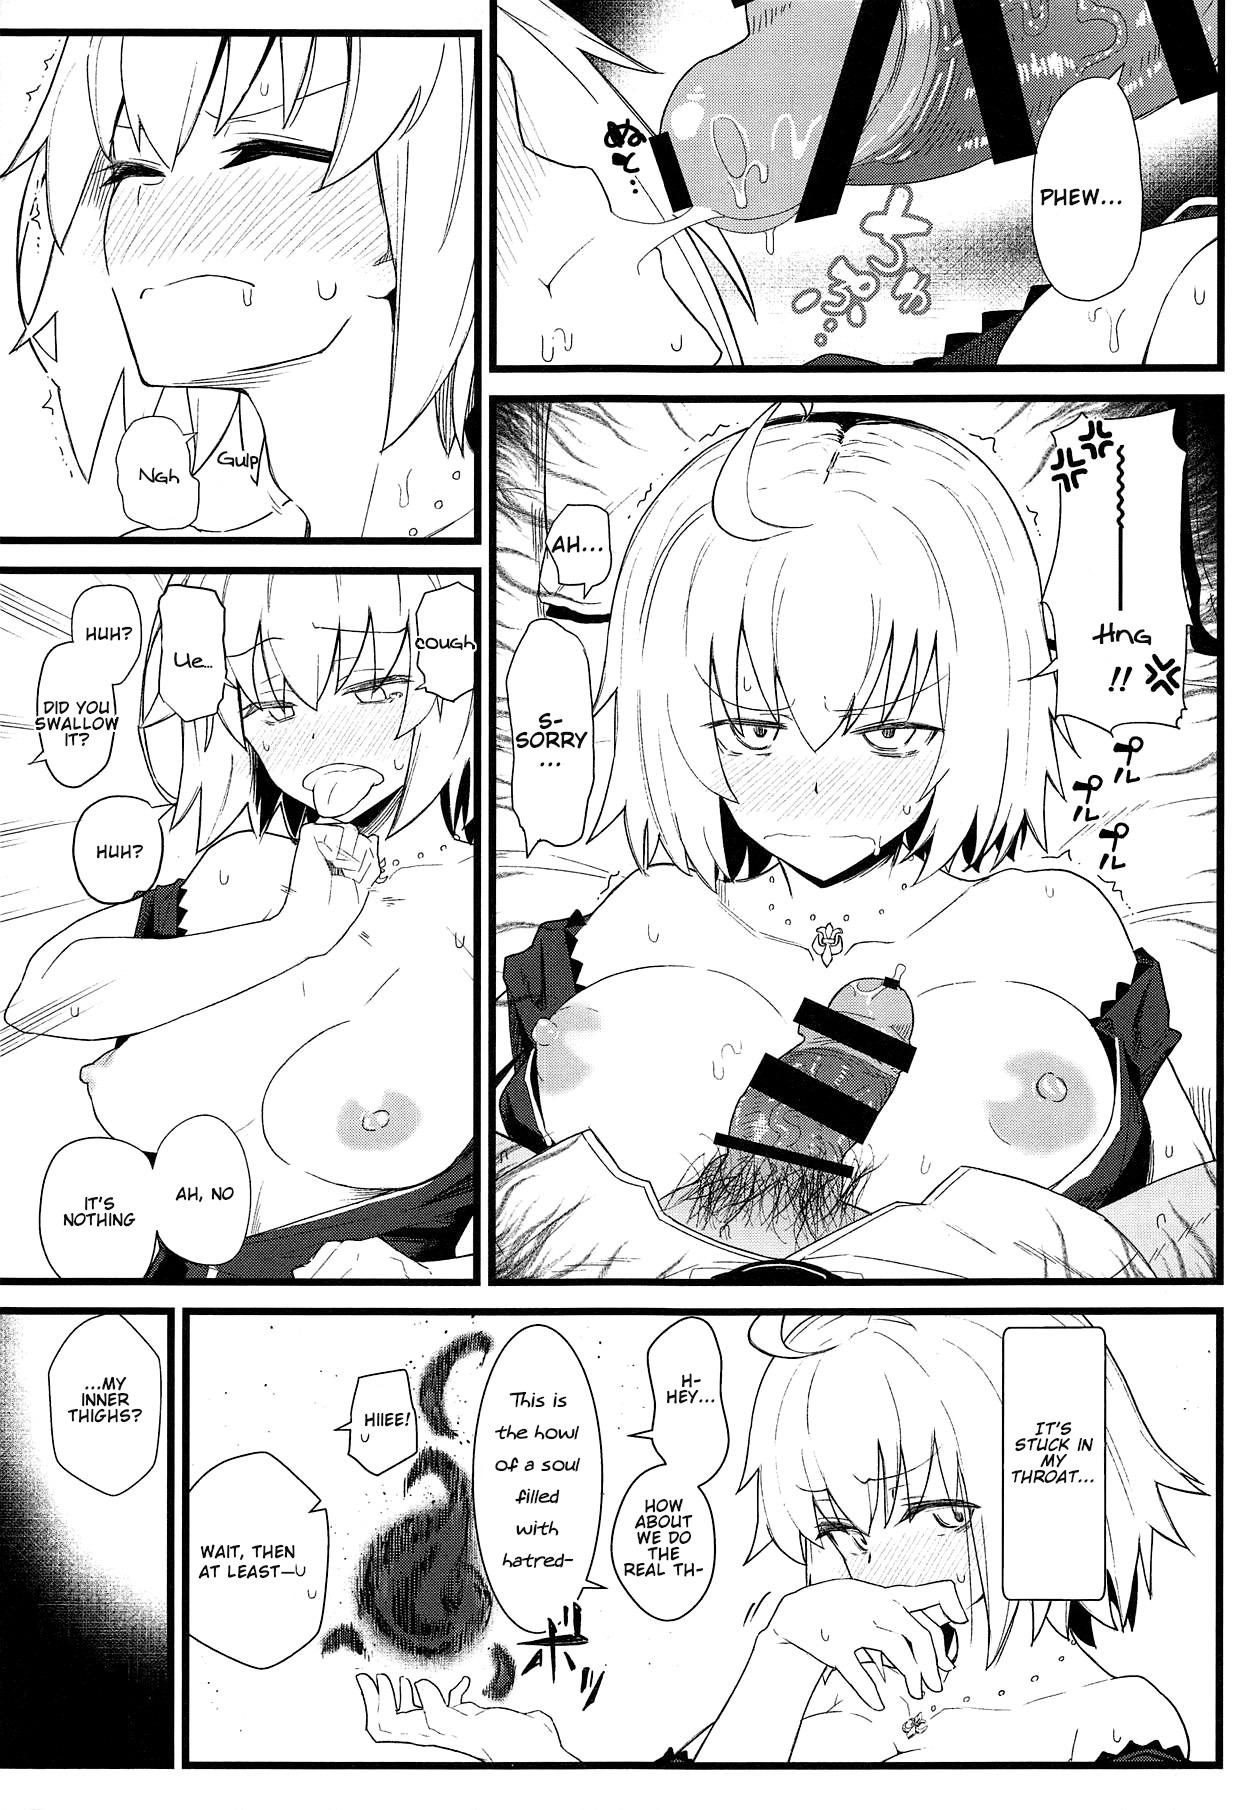 Atm GIRLFriend's 15 - Fate grand order Gozo - Page 8